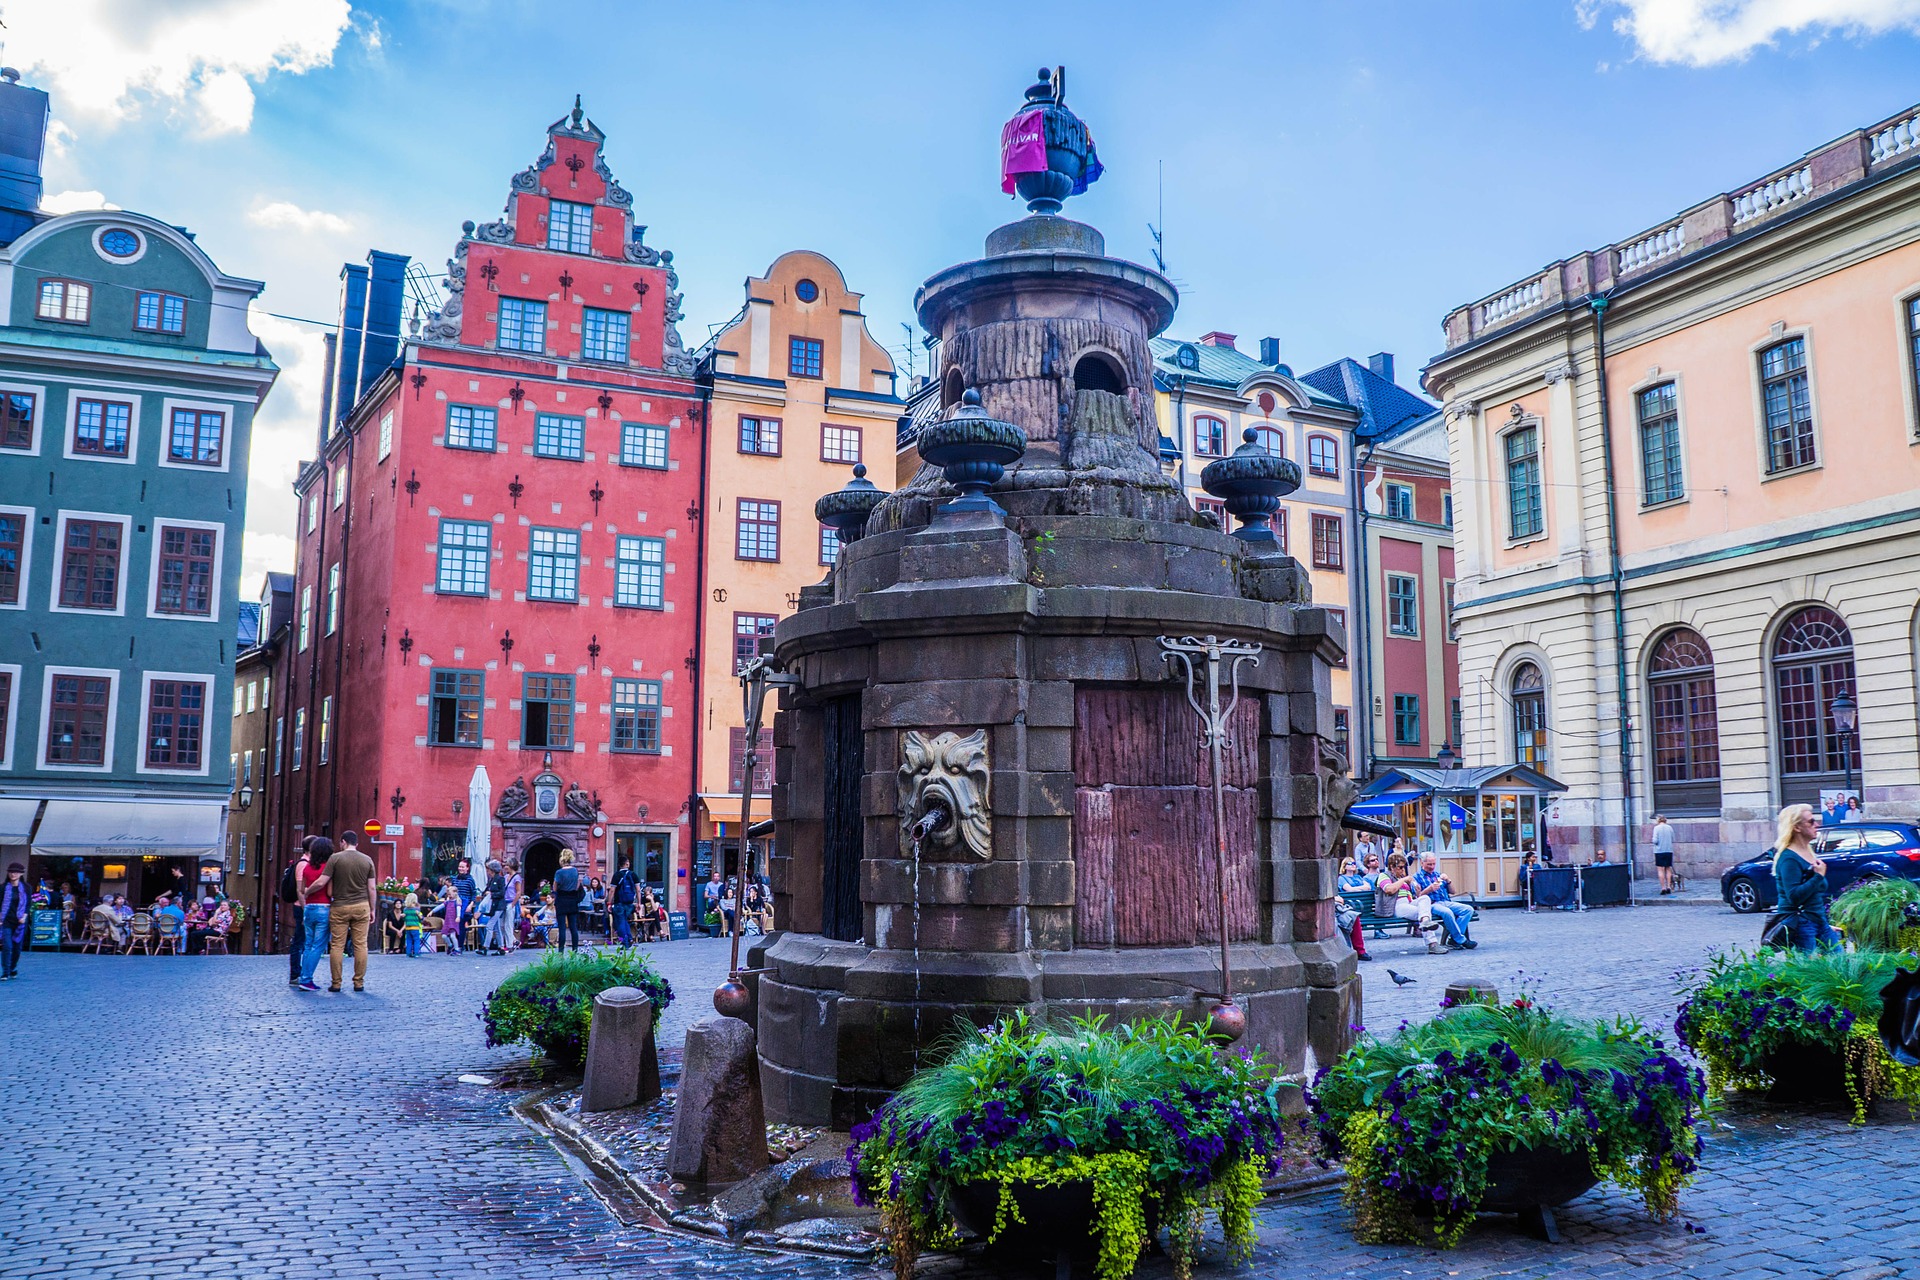 Stockholm, Sweden Image by Michelle Maria from Pixabay